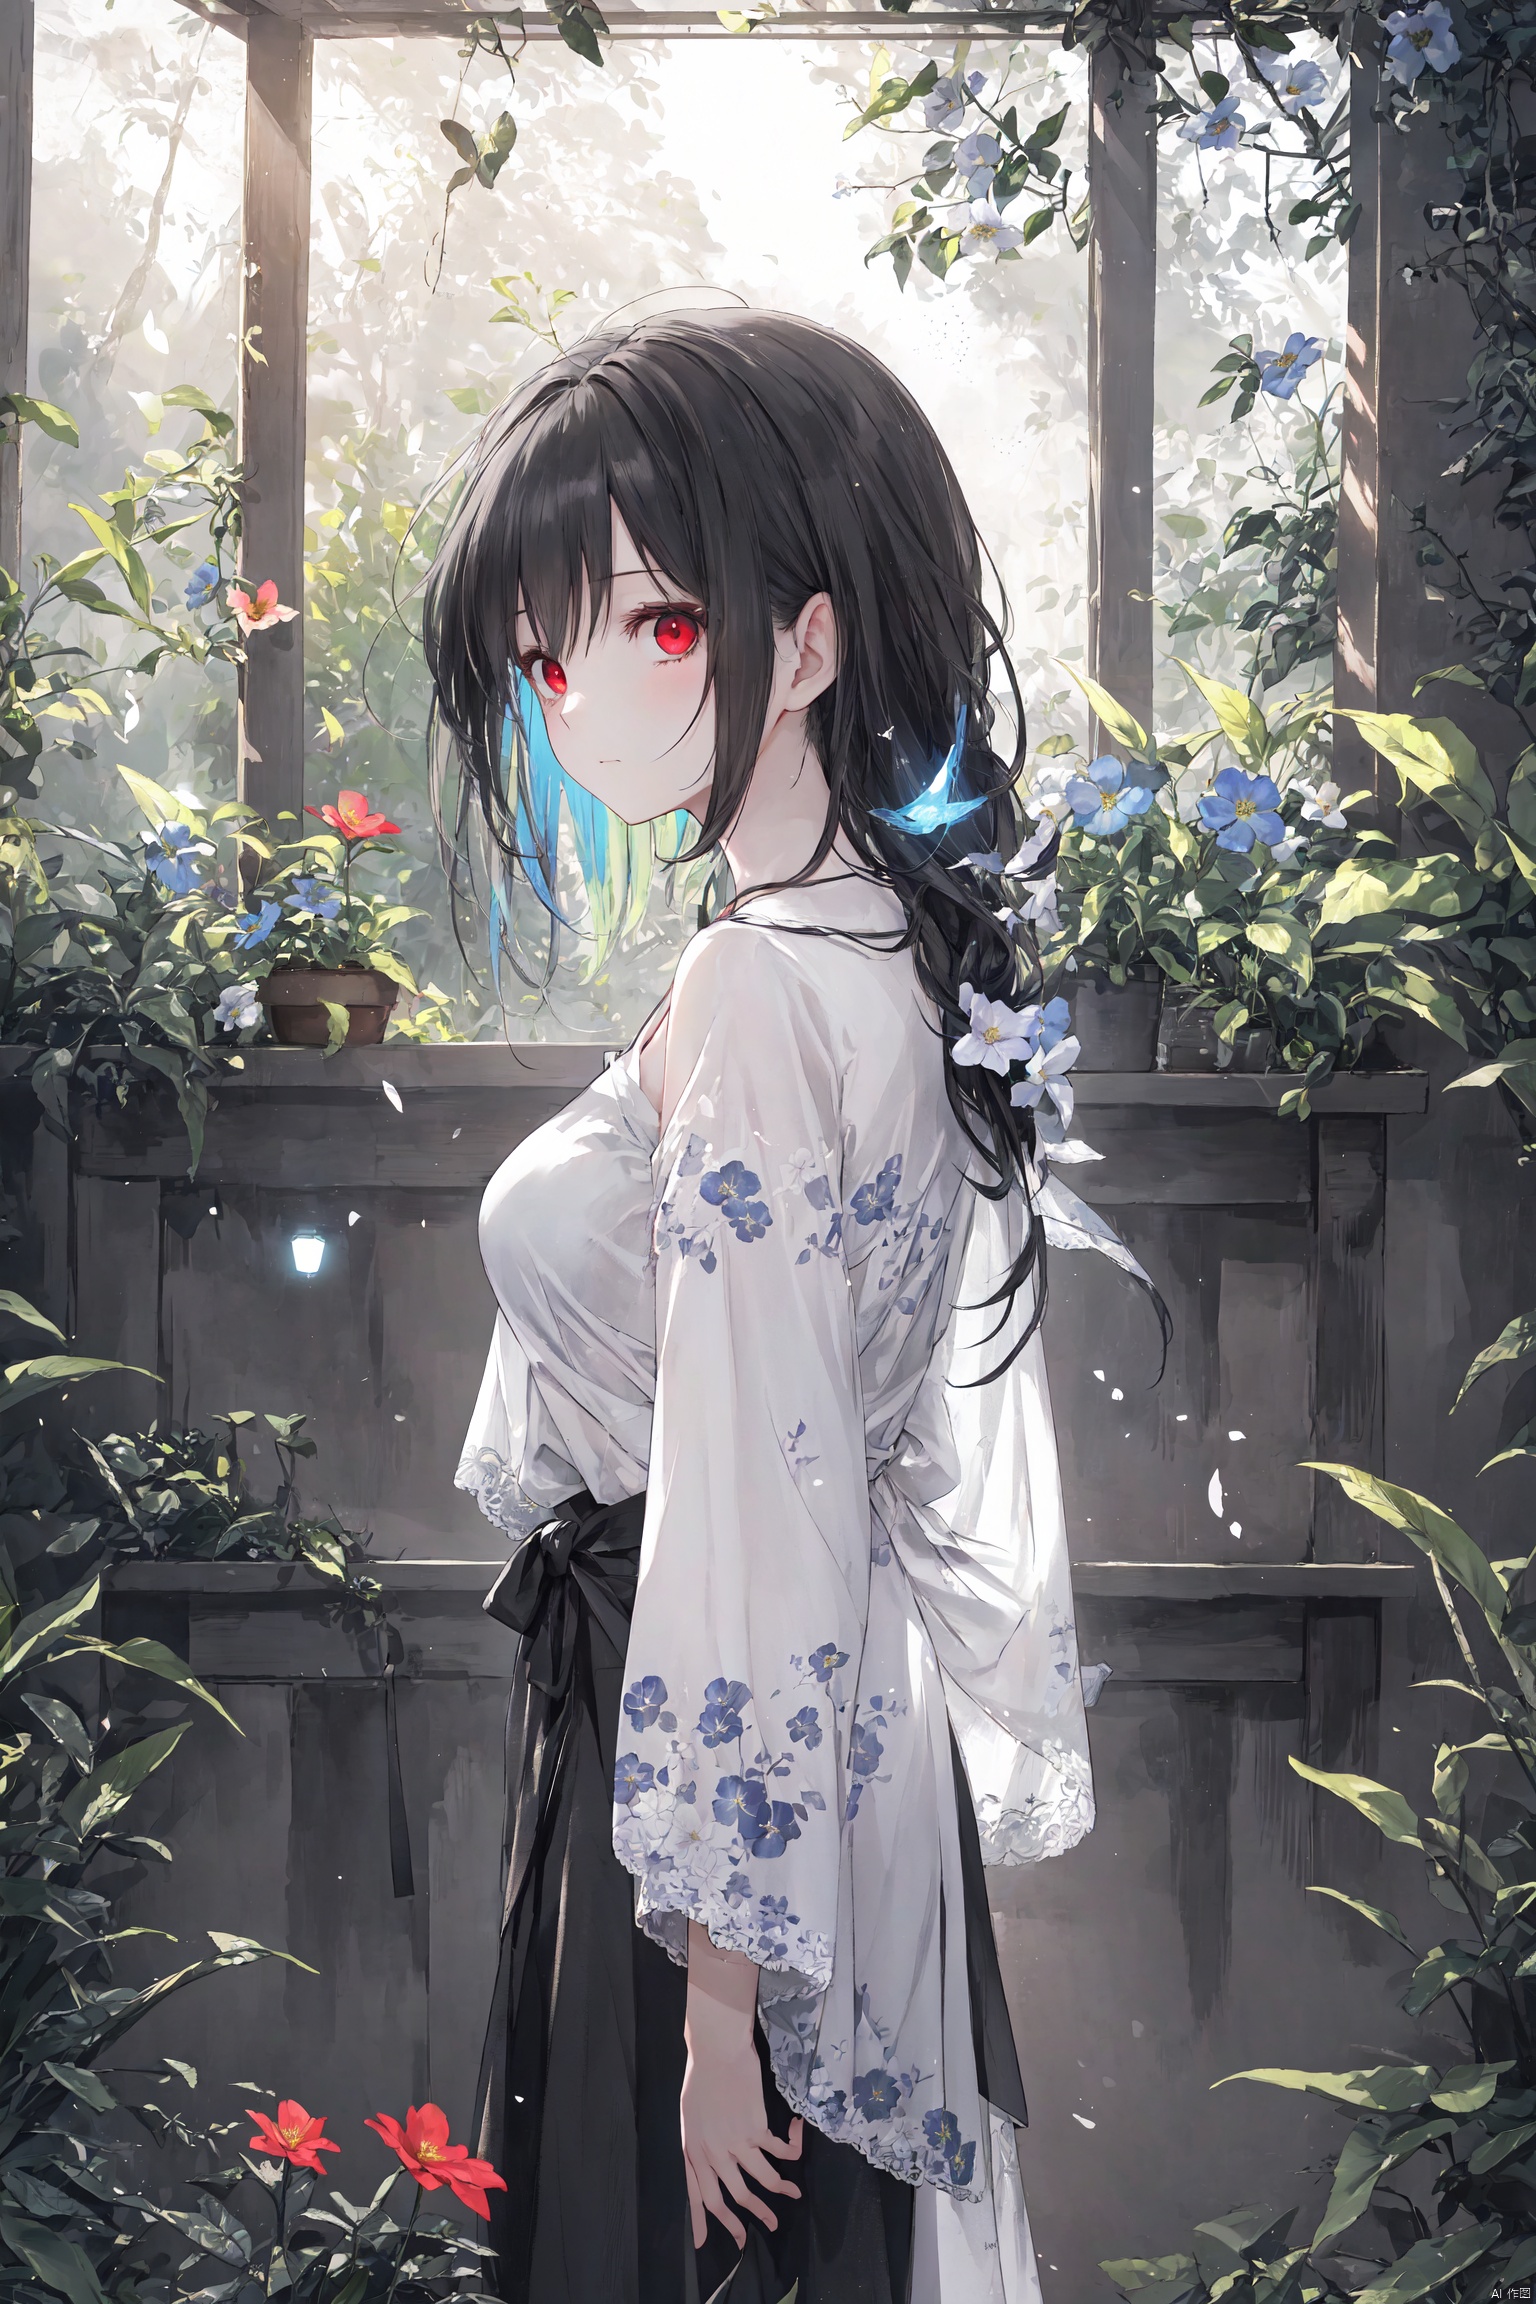  ```
(ethereal presence:1.5), (red eyes:1.2), (long black hair), (sheer clothing:1.1), (standing in a vibrant flower field), (moderately sized breasts), (visible collarbones), (suggestive transparency of skin), (high-quality visual fidelity), (illuminated left side of the image:1.3), (darker, more mysterious right side), (soft gradient of light), (warm sunlight from the left), (cooler, shaded tones on the right), (variety of flowers in bloom), (whispering grasses), (delicate floral scents), (subtle use of chiaroscuro), (natural and relaxed posture), (serene expression), (harmony with the natural surroundings), (gentle breeze interaction with hair and clothing), (slight glow on the skin), (intriguing interplay of light and shadow), (depth and dimension in the scene), (golden hour effect on the left side), (cooler, contrasting tones on the right), (highlights and lowlights to accentuate form), (moment of quiet reflection), (connection to the beauty of nature)
```